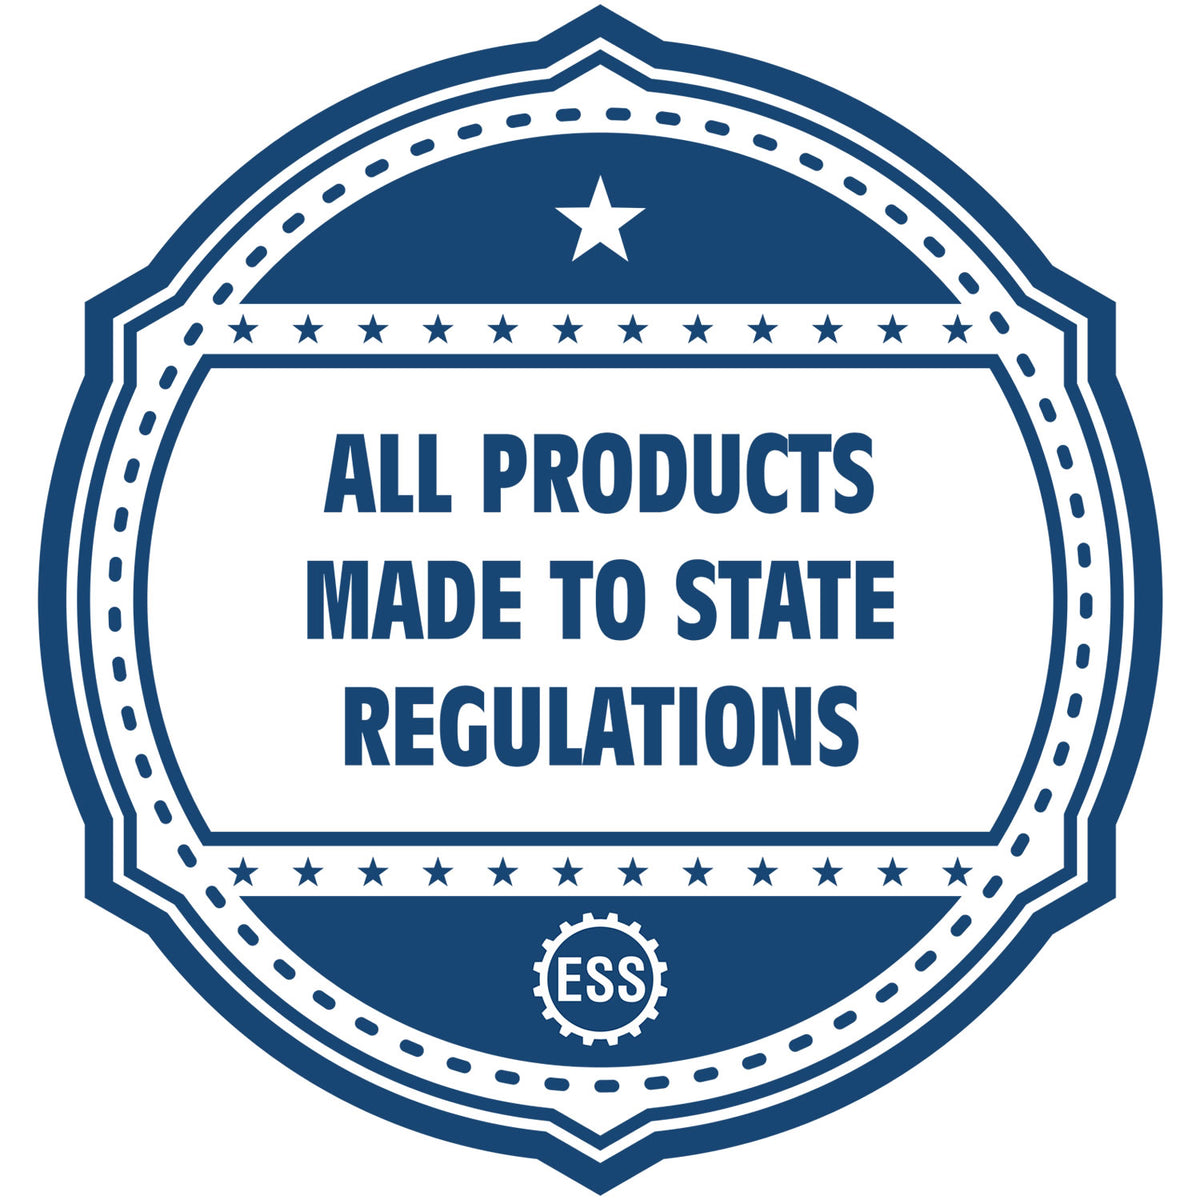 An icon or badge element for the Soft Pocket Minnesota Landscape Architect Embosser showing that this product is made in compliance with state regulations.